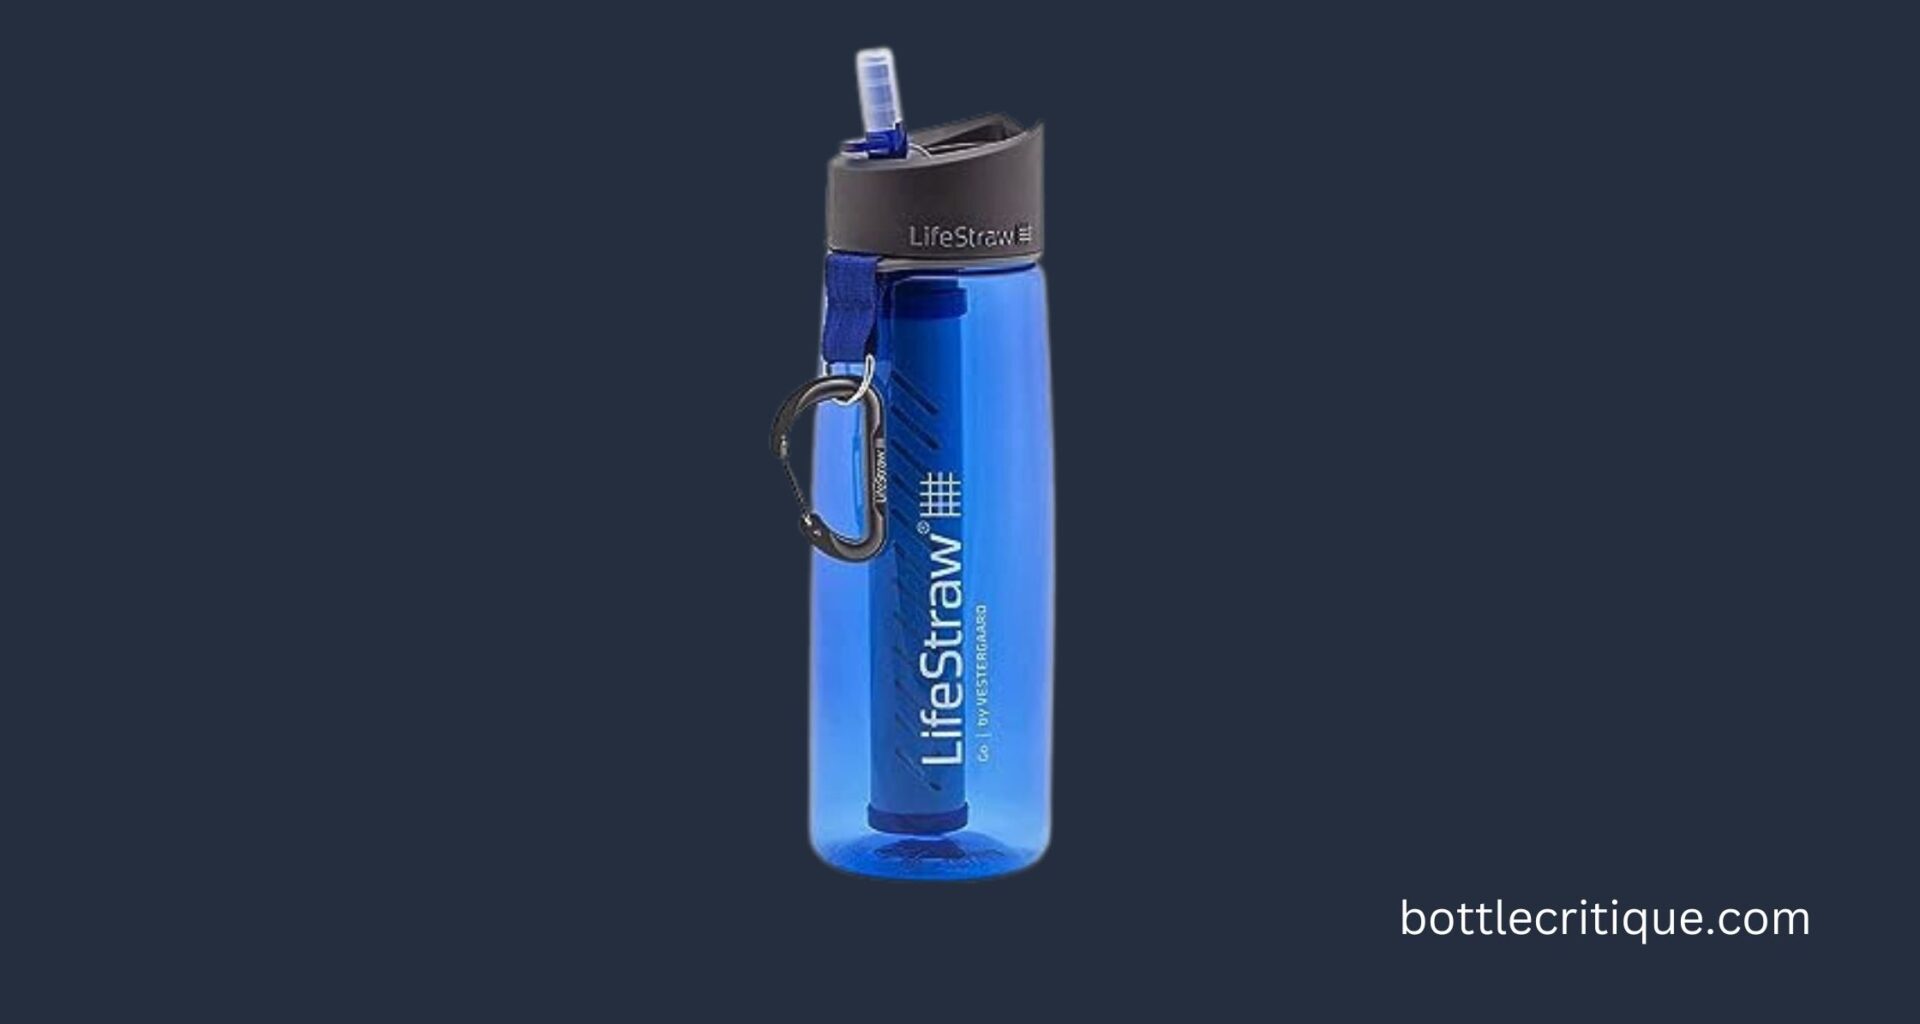 How to Use Lifestraw Water Bottle?